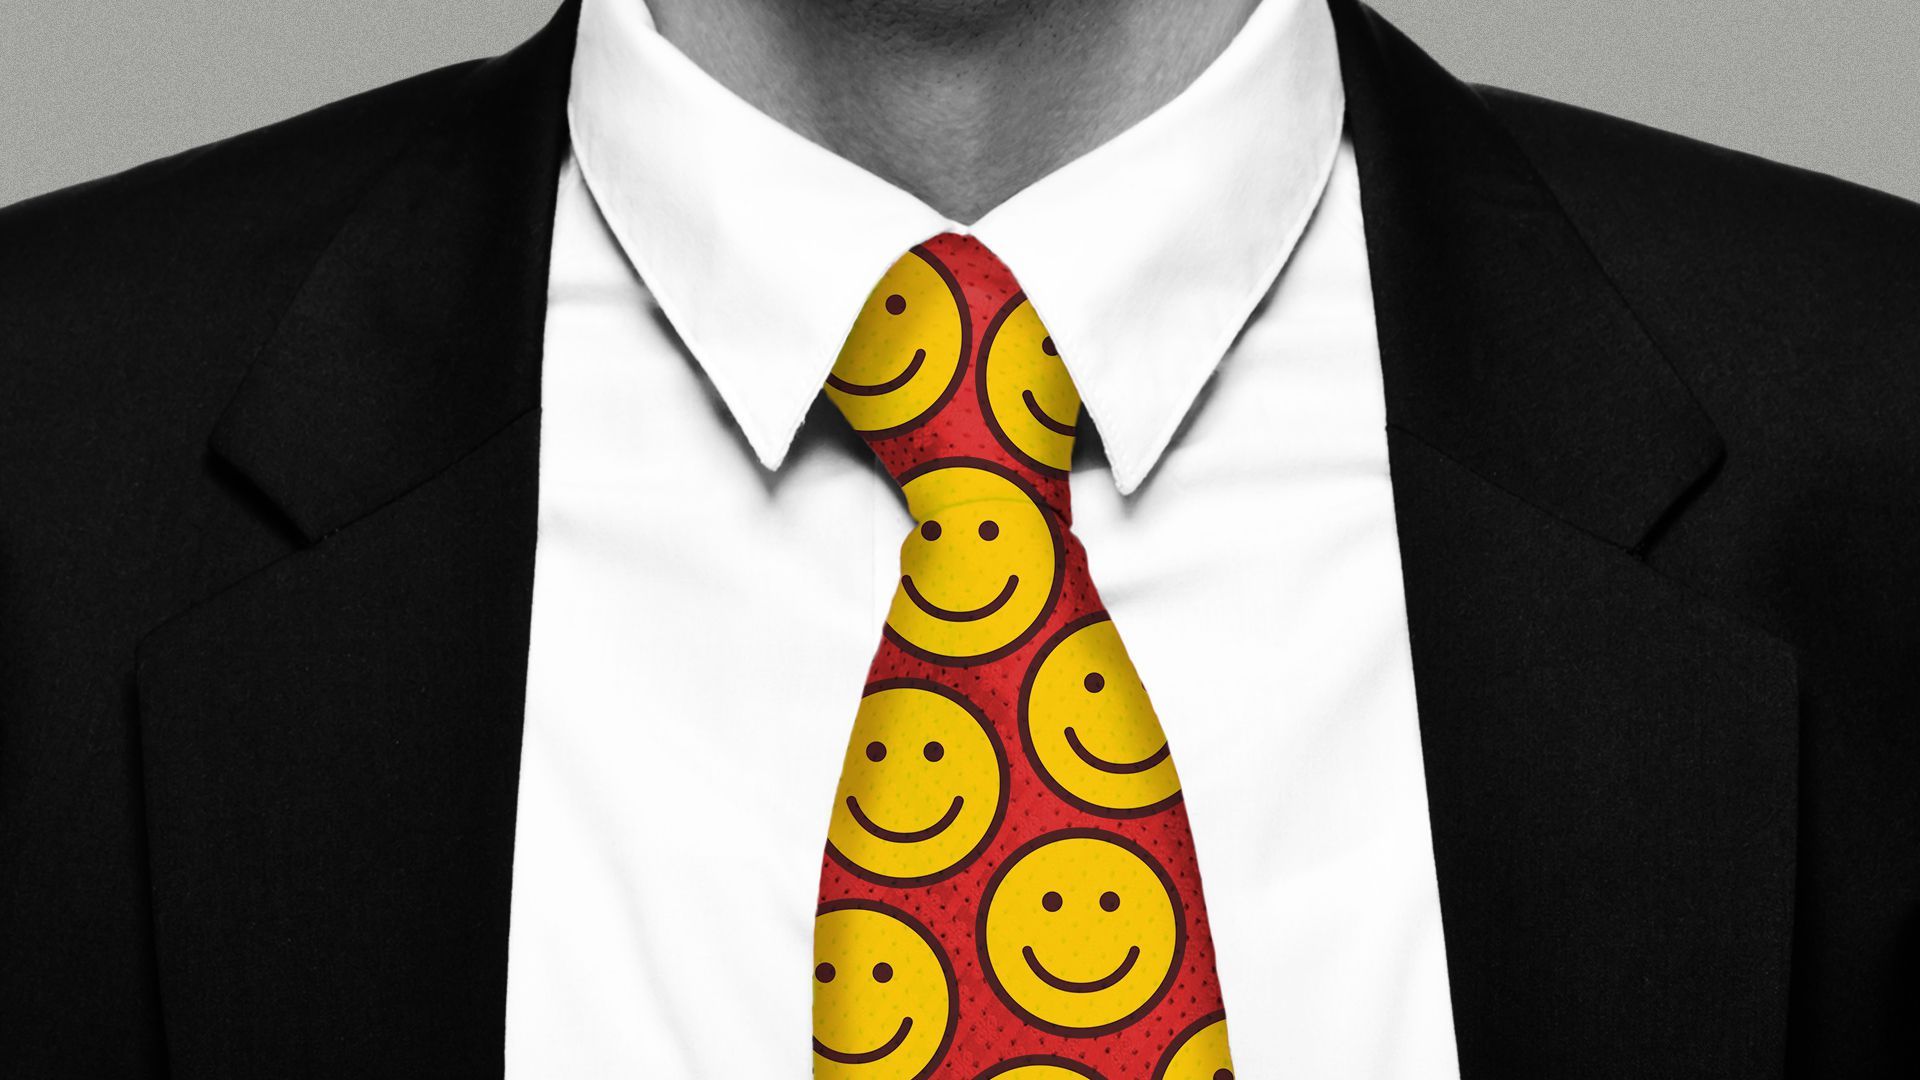 Illustration of a person wearing a red necktie with a smiley face pattern.